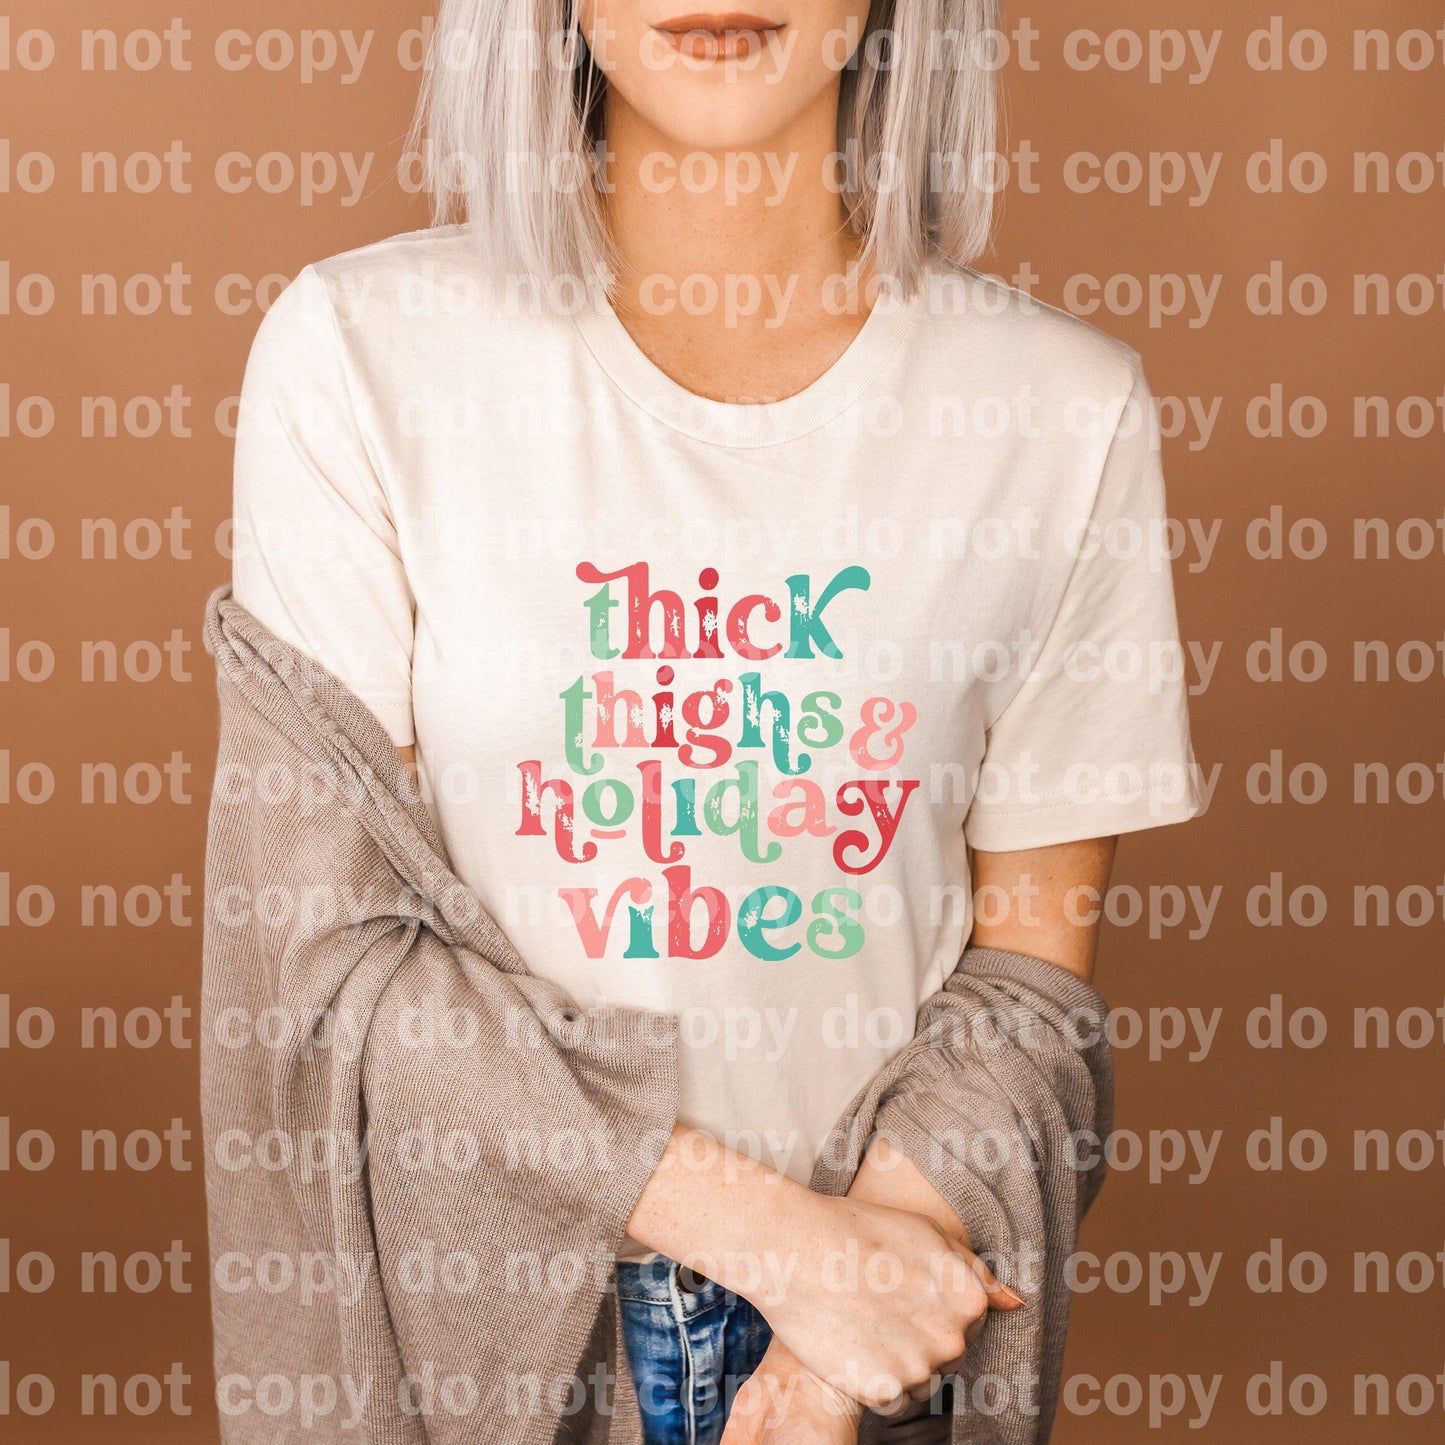 Thick Thighs and Holiday Vibes Typography Distressed Dream print transfer